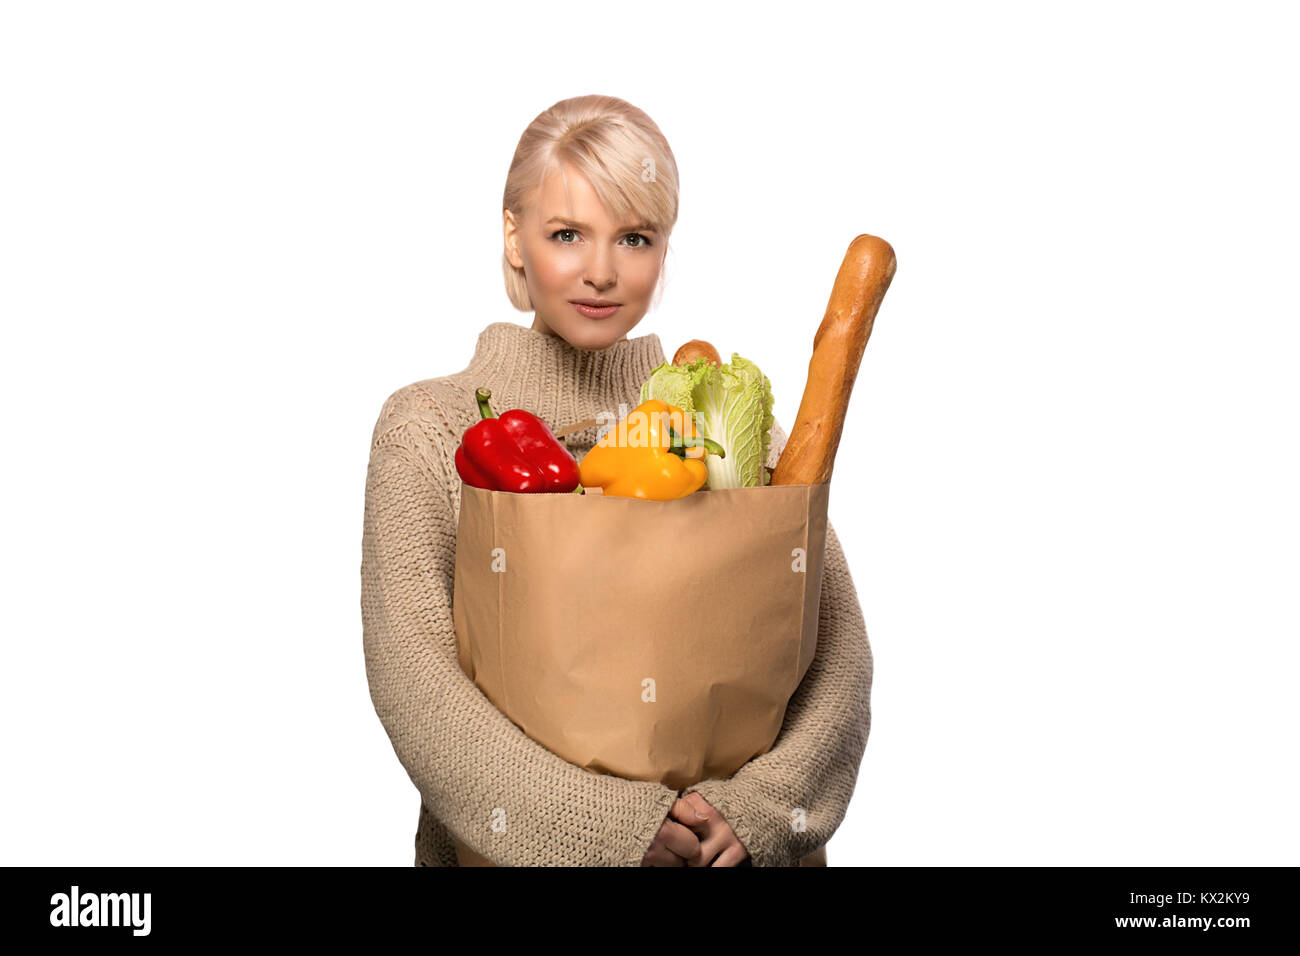 Portrait of happy smiling woman with groceries shopping bag full of vegetables isolated on white background Stock Photo